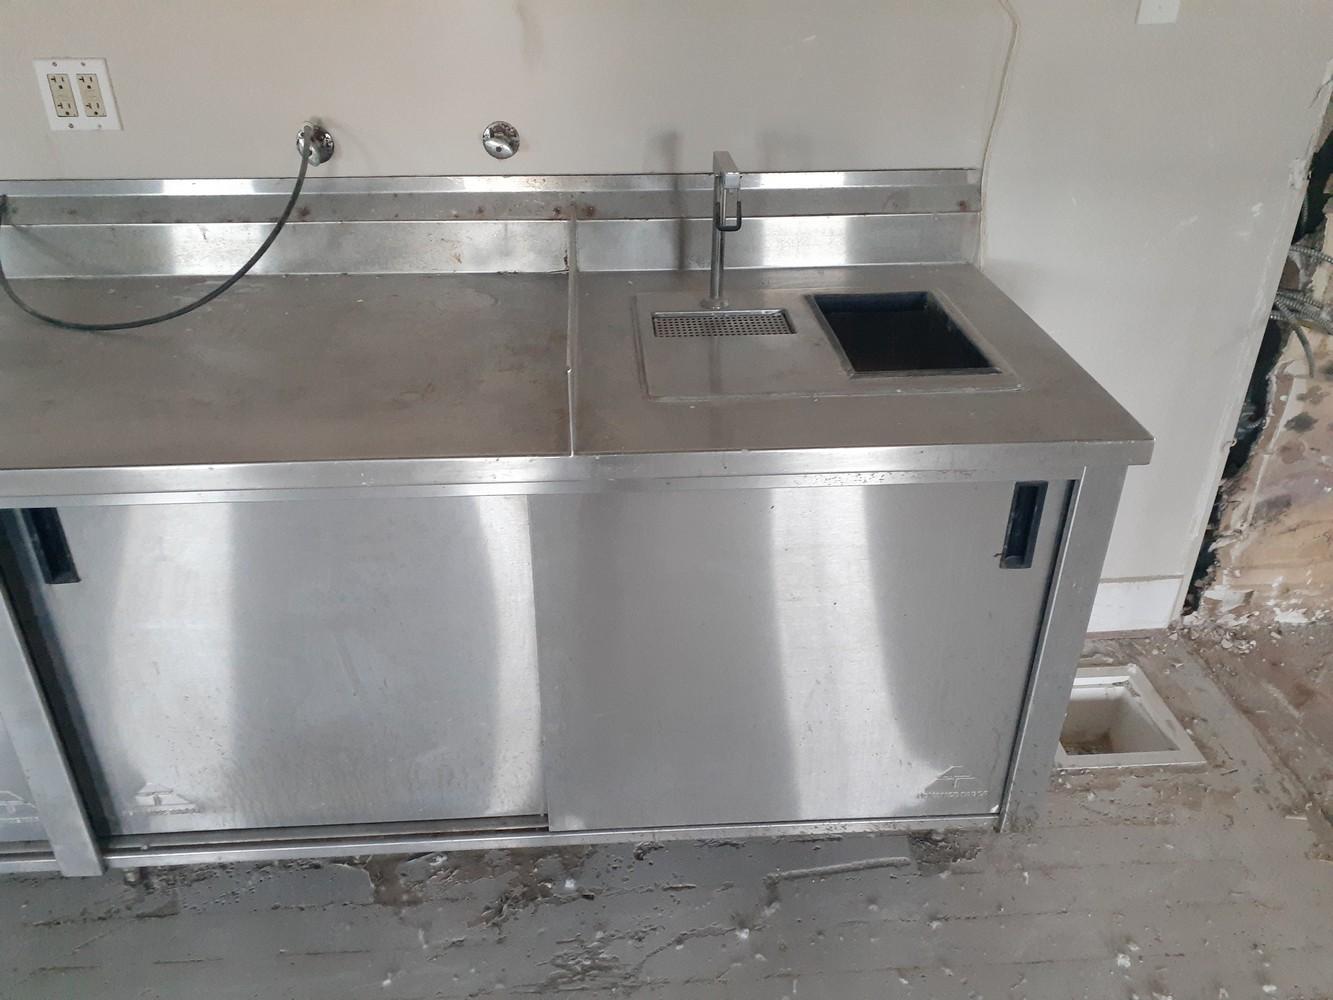 Approx. 10 Ft Stainless Steel Waitress Station w Ice bin, water spout